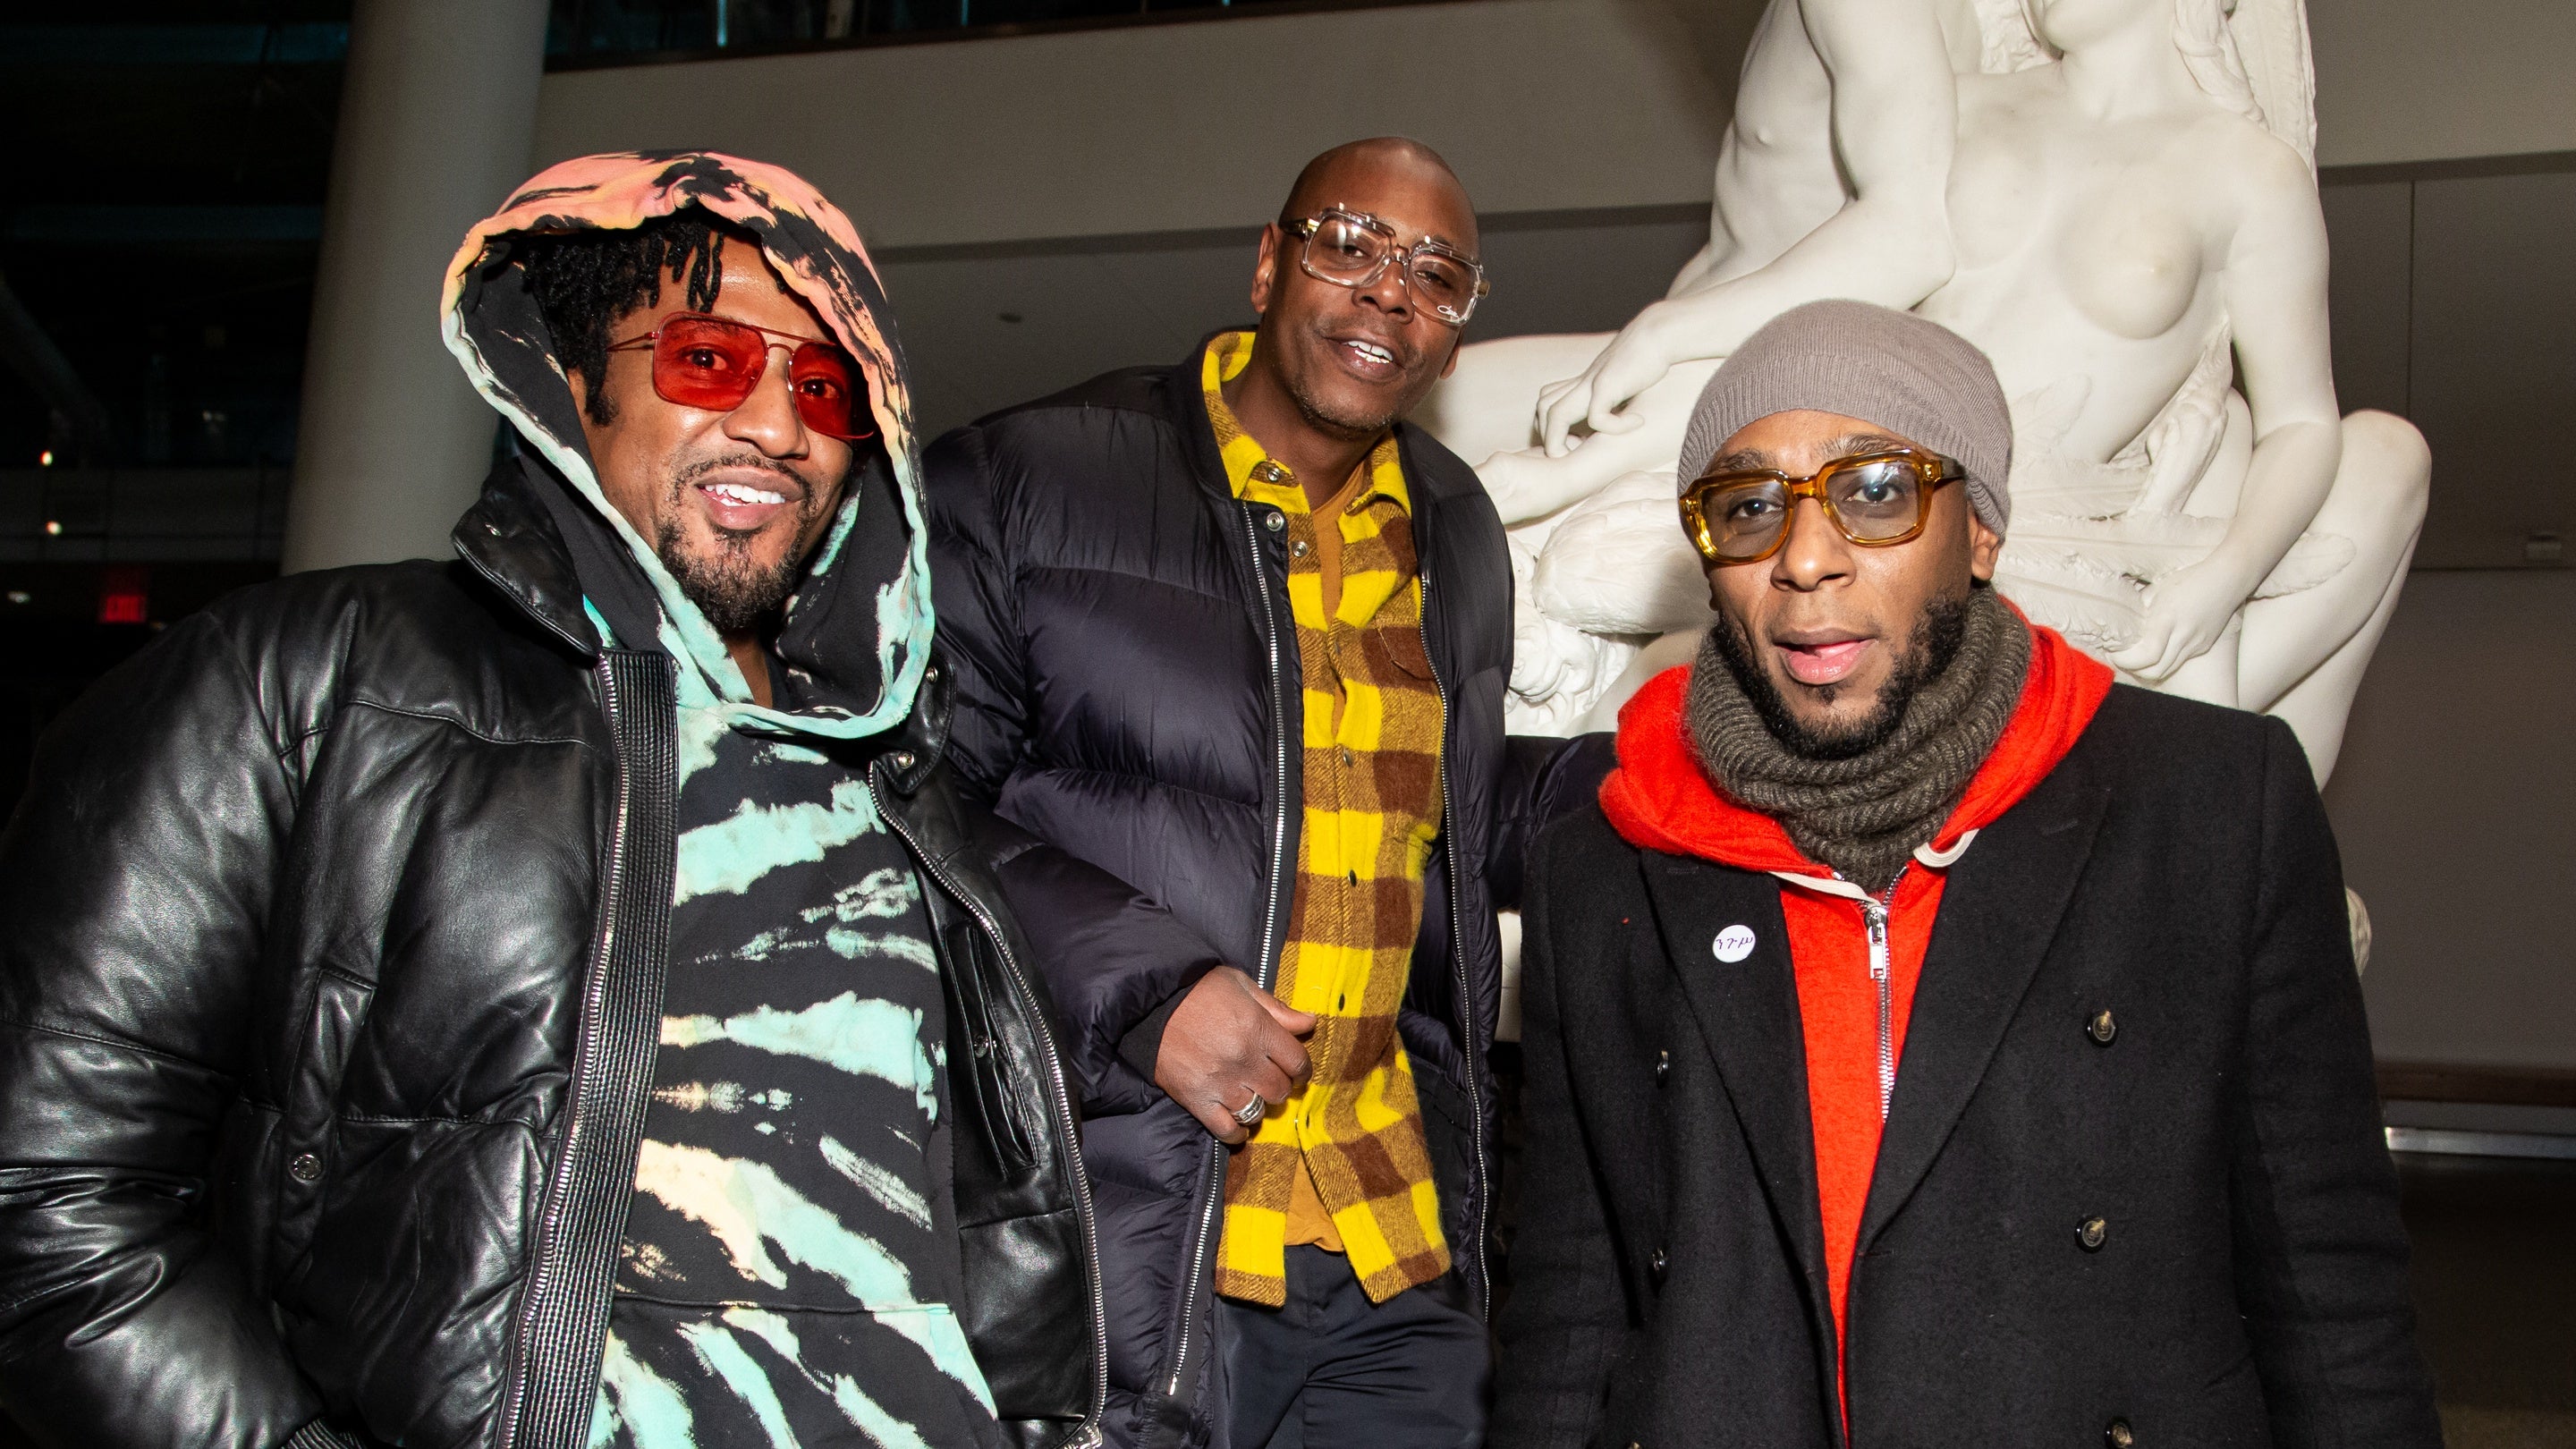 Dave Chappelle, Q-Tip & Brooklyn Show Out for Yasiin Bey's 'Negus